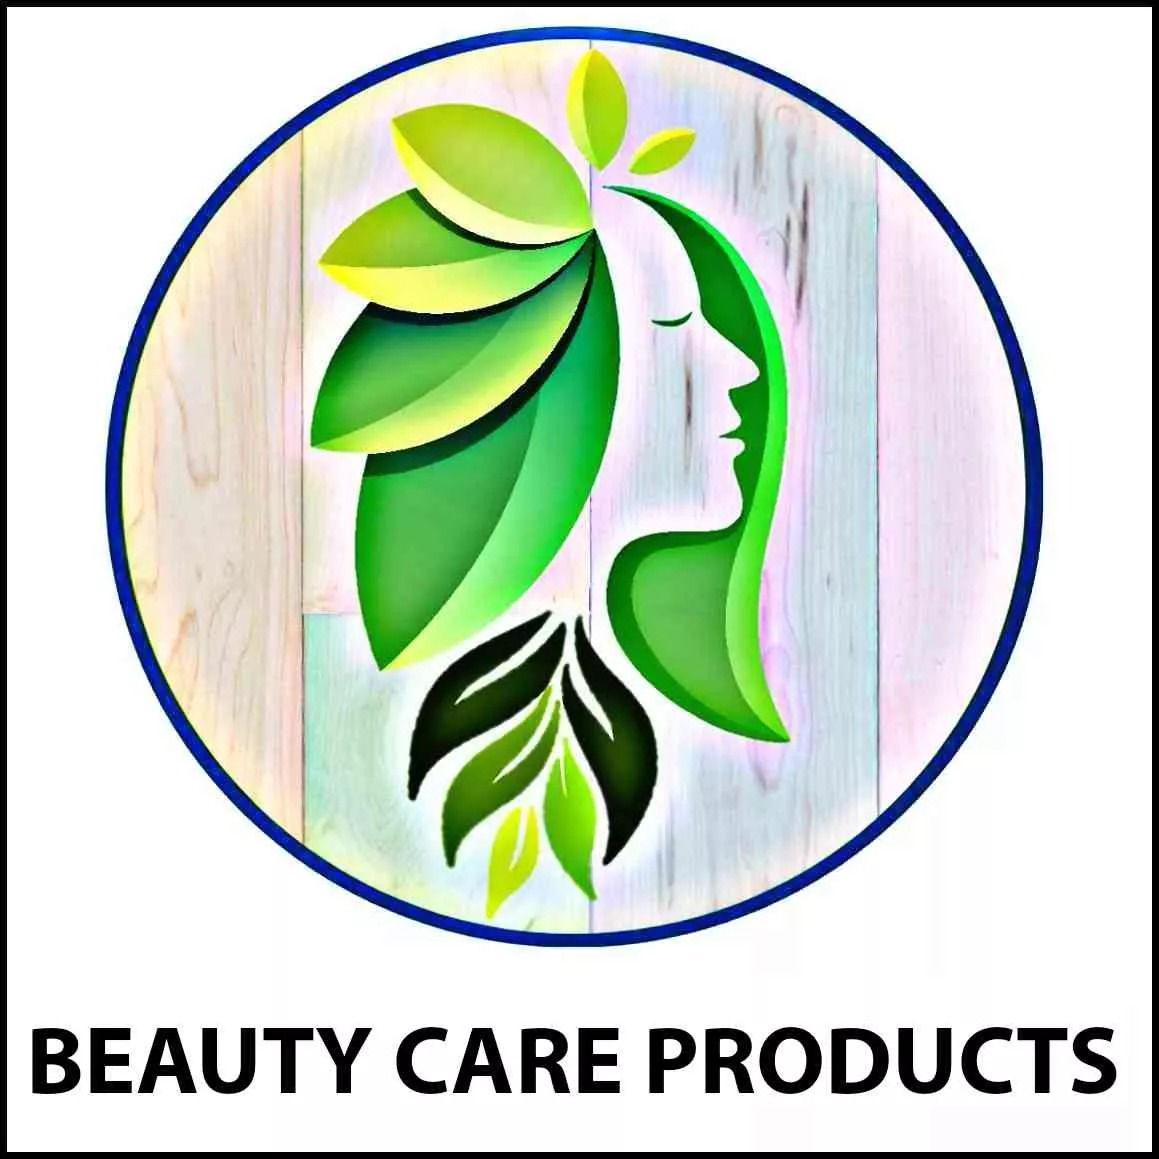 Coorg beauty care products